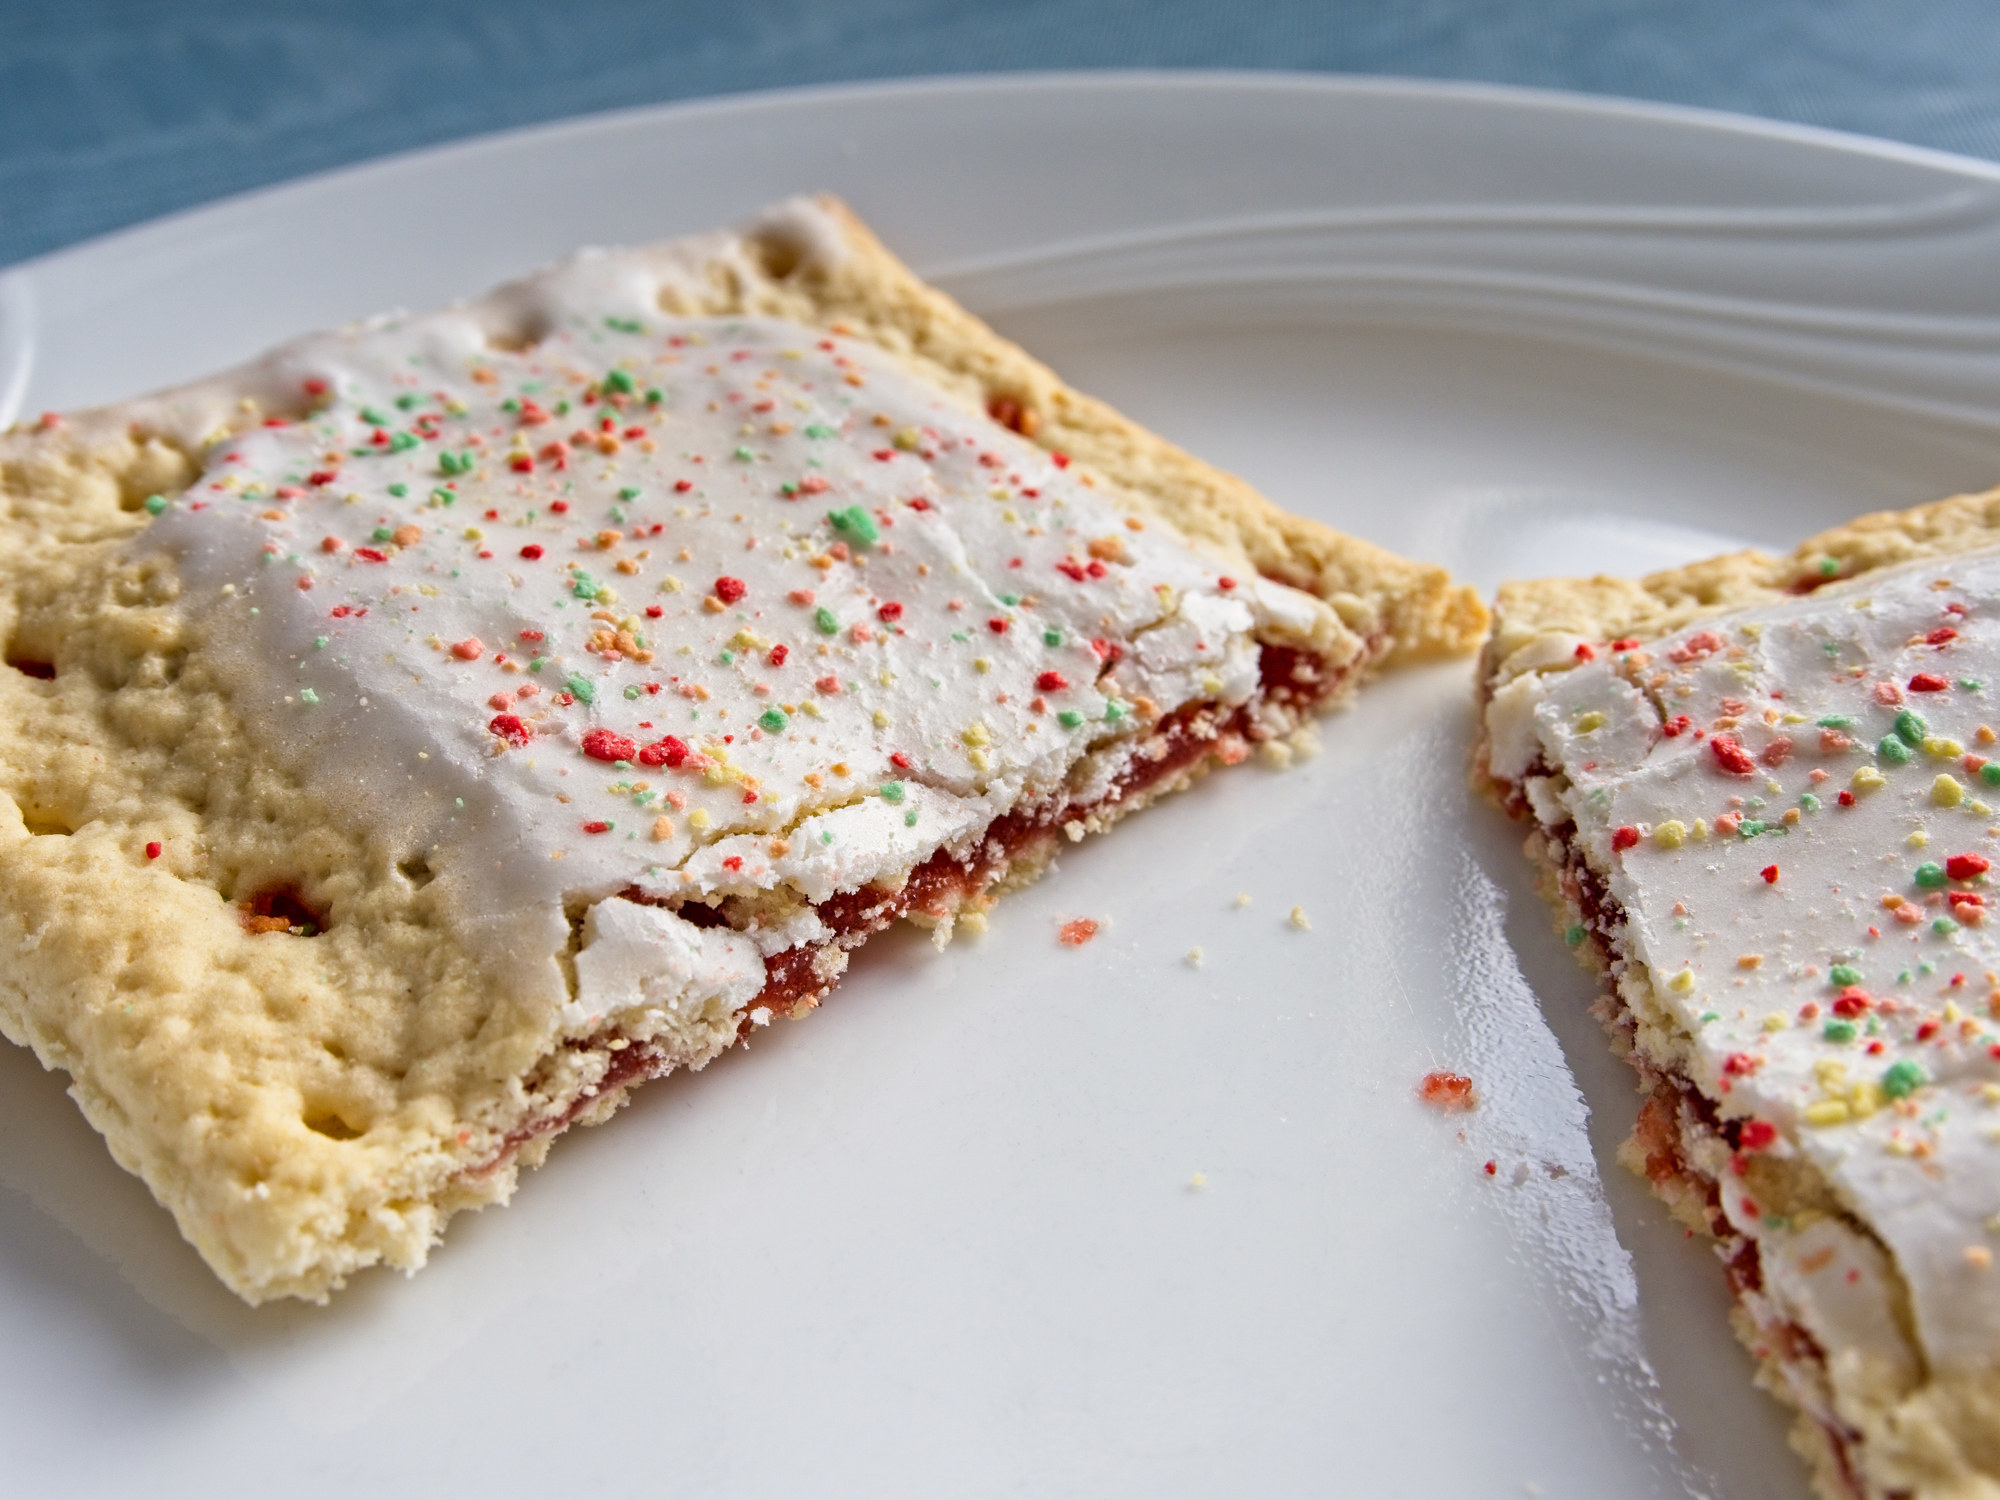 A toaster pastry with strawberry filling, vanilla icing, and sprinkles